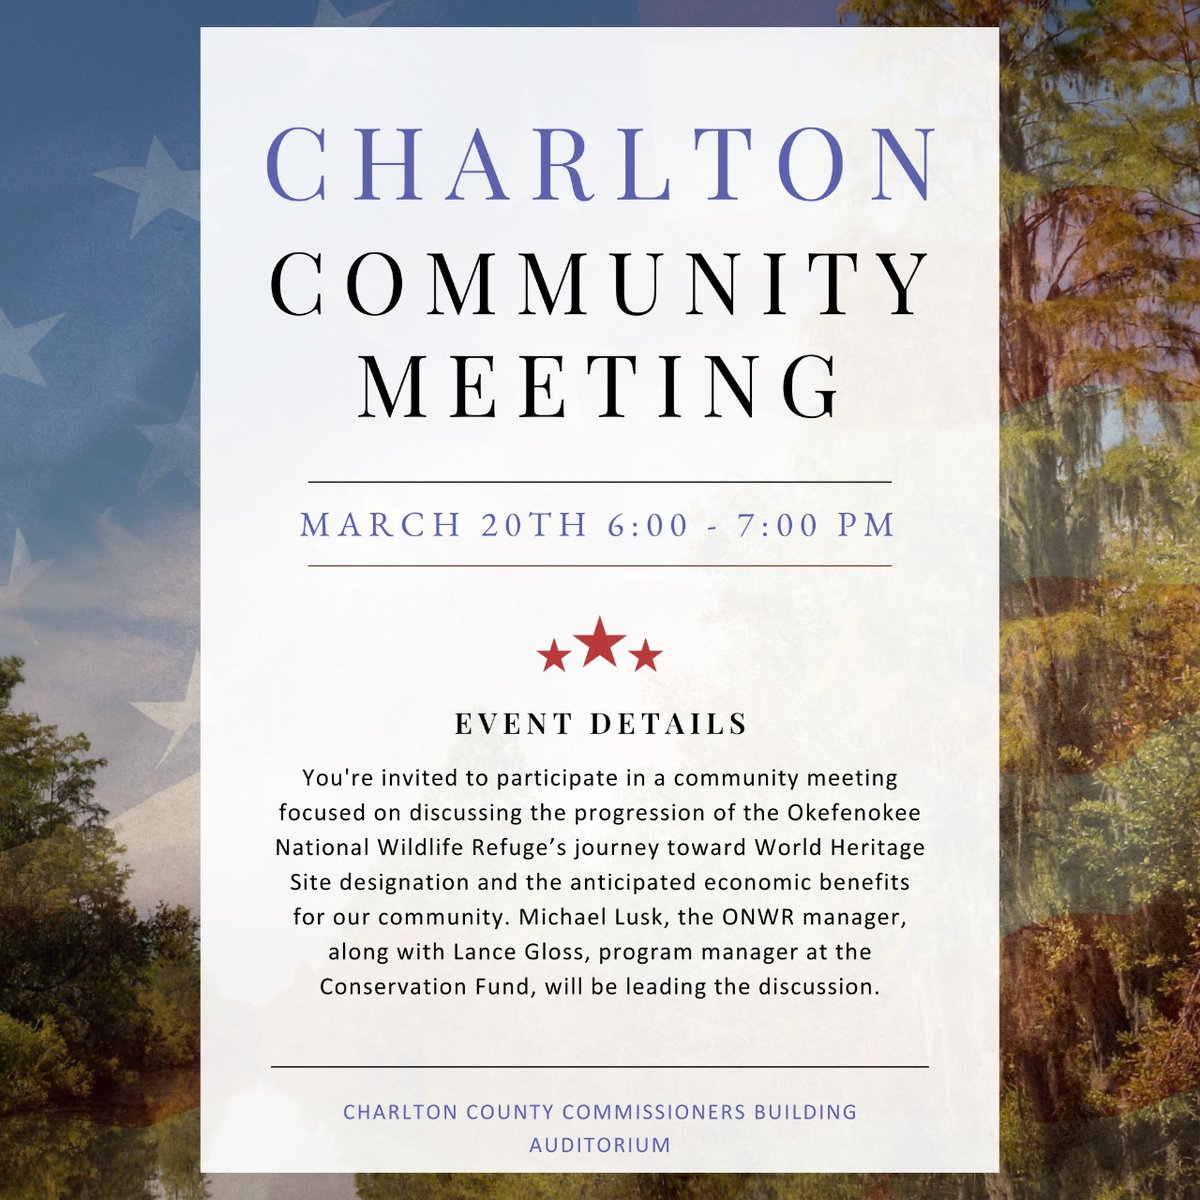 You're invited to participate in a community meeting focused on discussing the progression of the Okefenokee National Wildlife Refuge's journey toward World Heritage Site designation and the anticipated economic benefits for our community.  MARCH 20TH, 2024